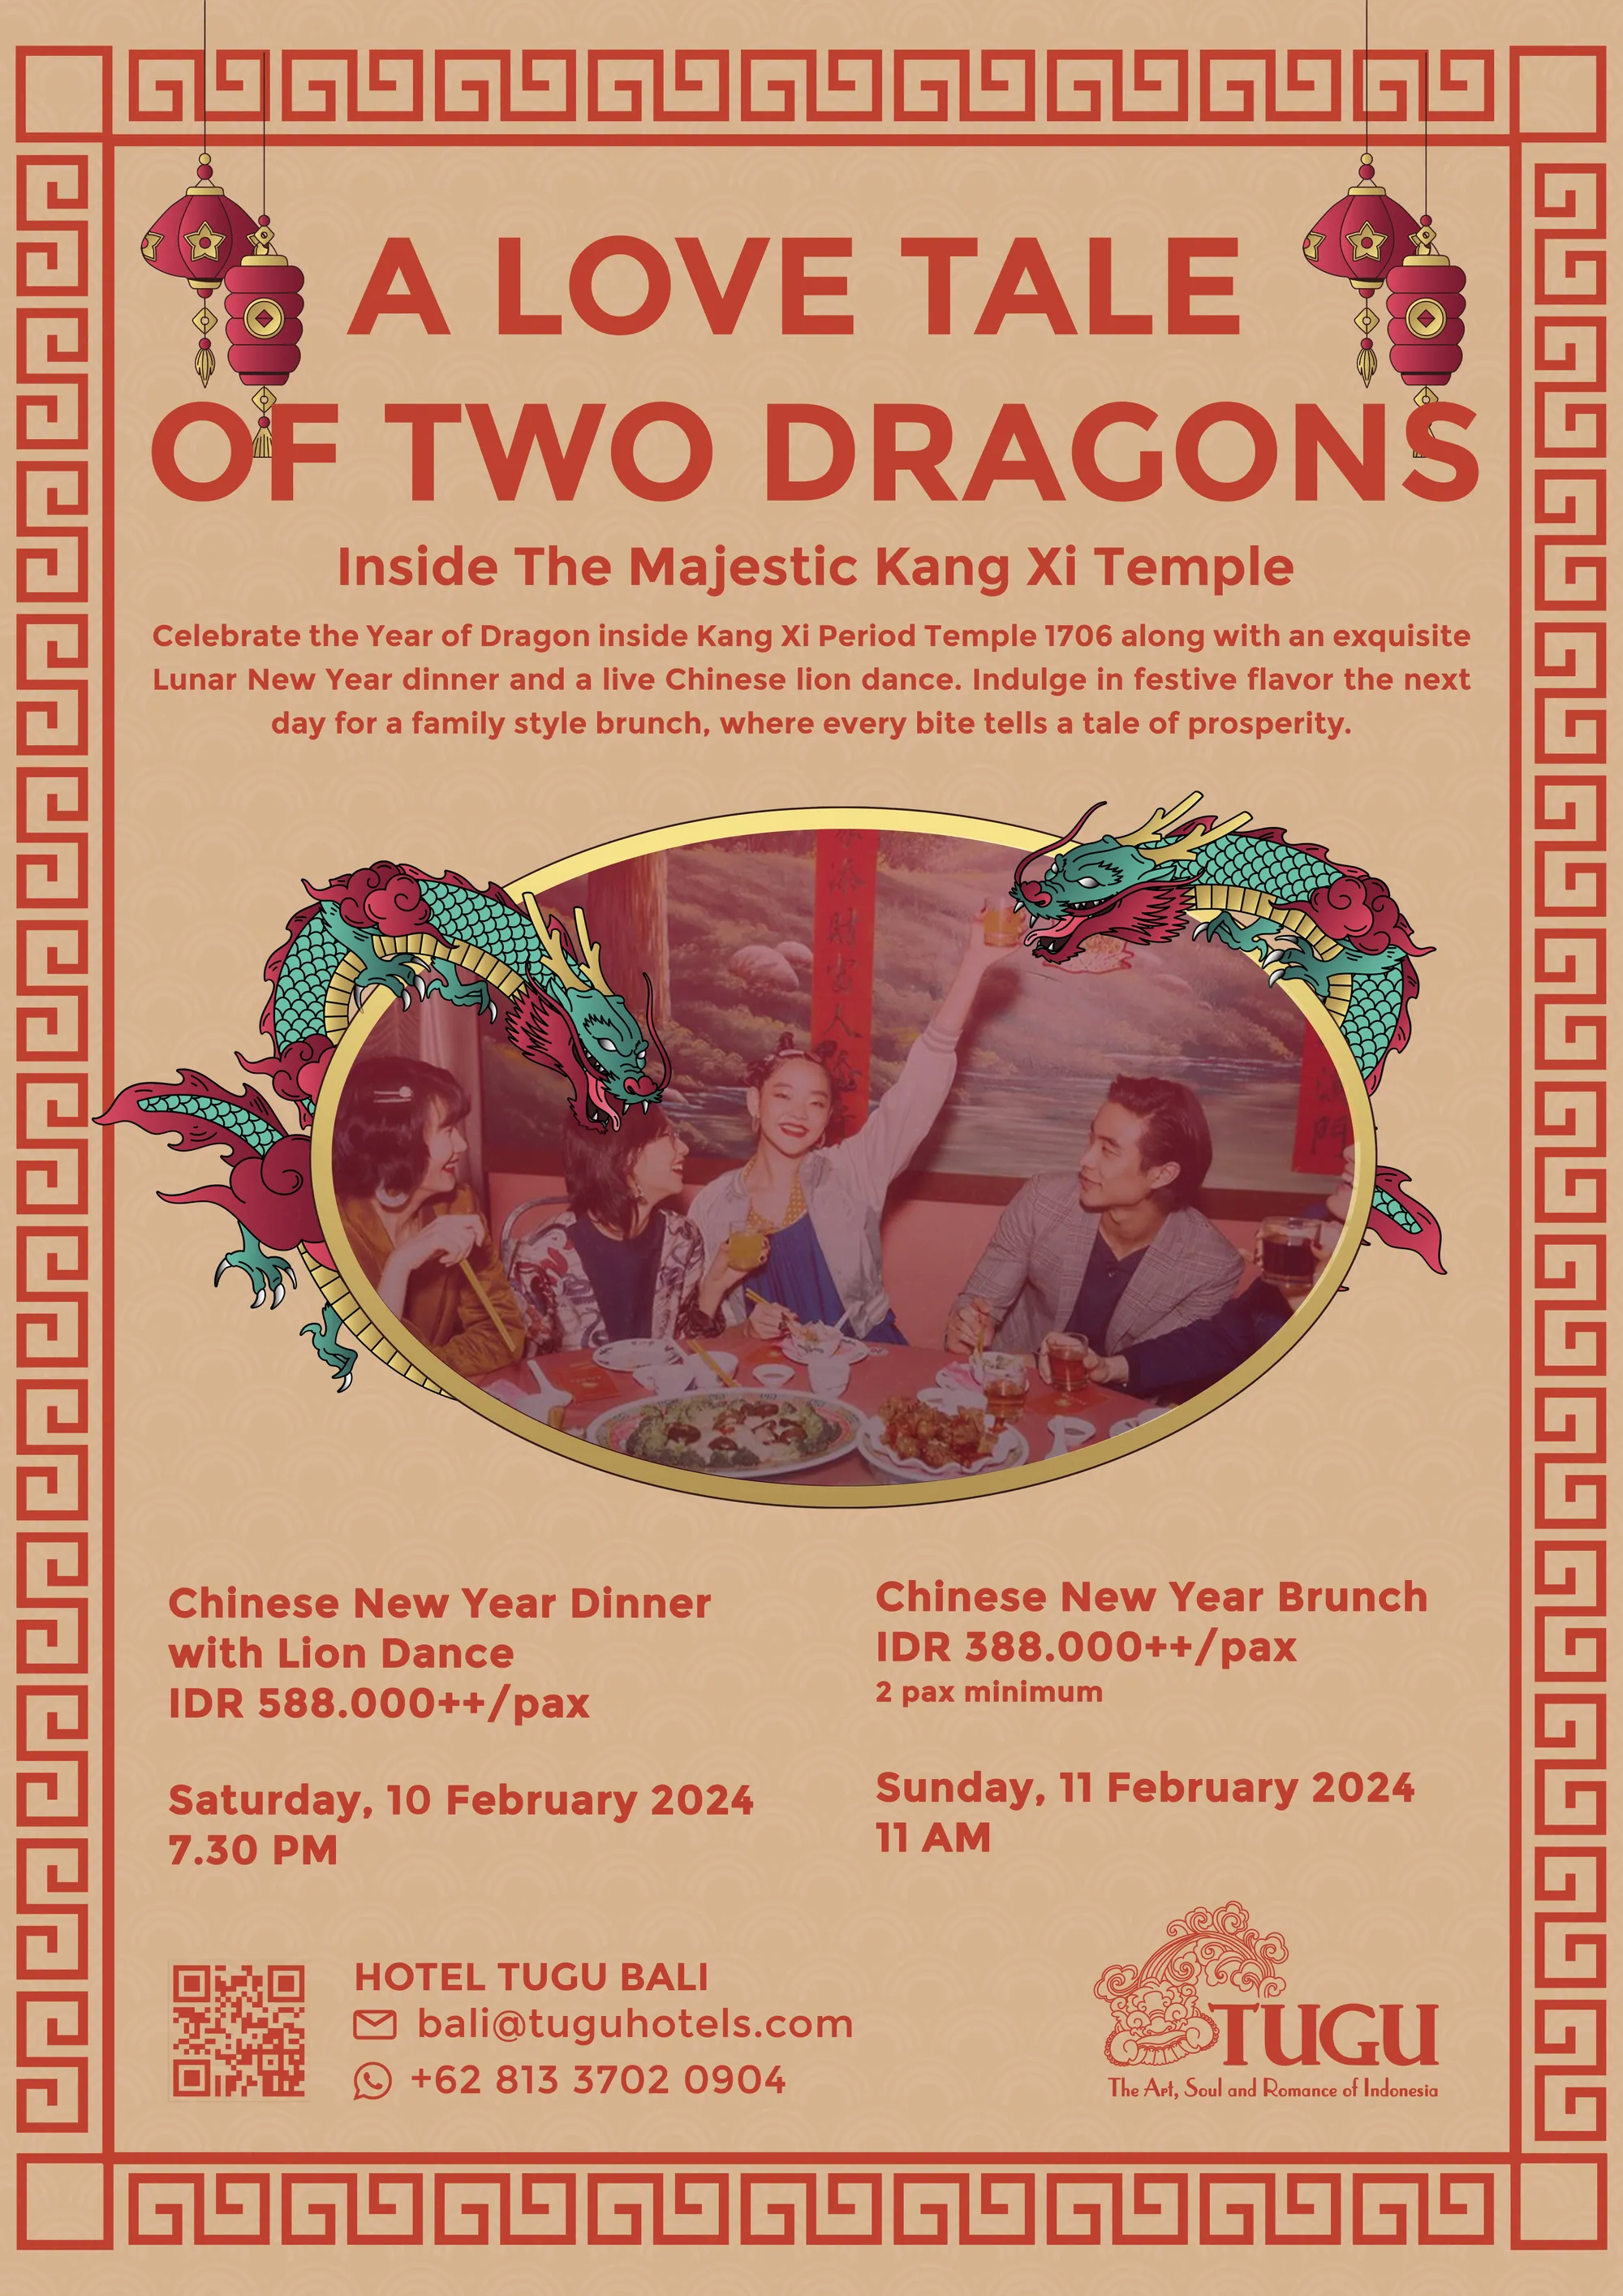 Food A Love Tale of Two Dragons: CNY Dinner & Brunch 239